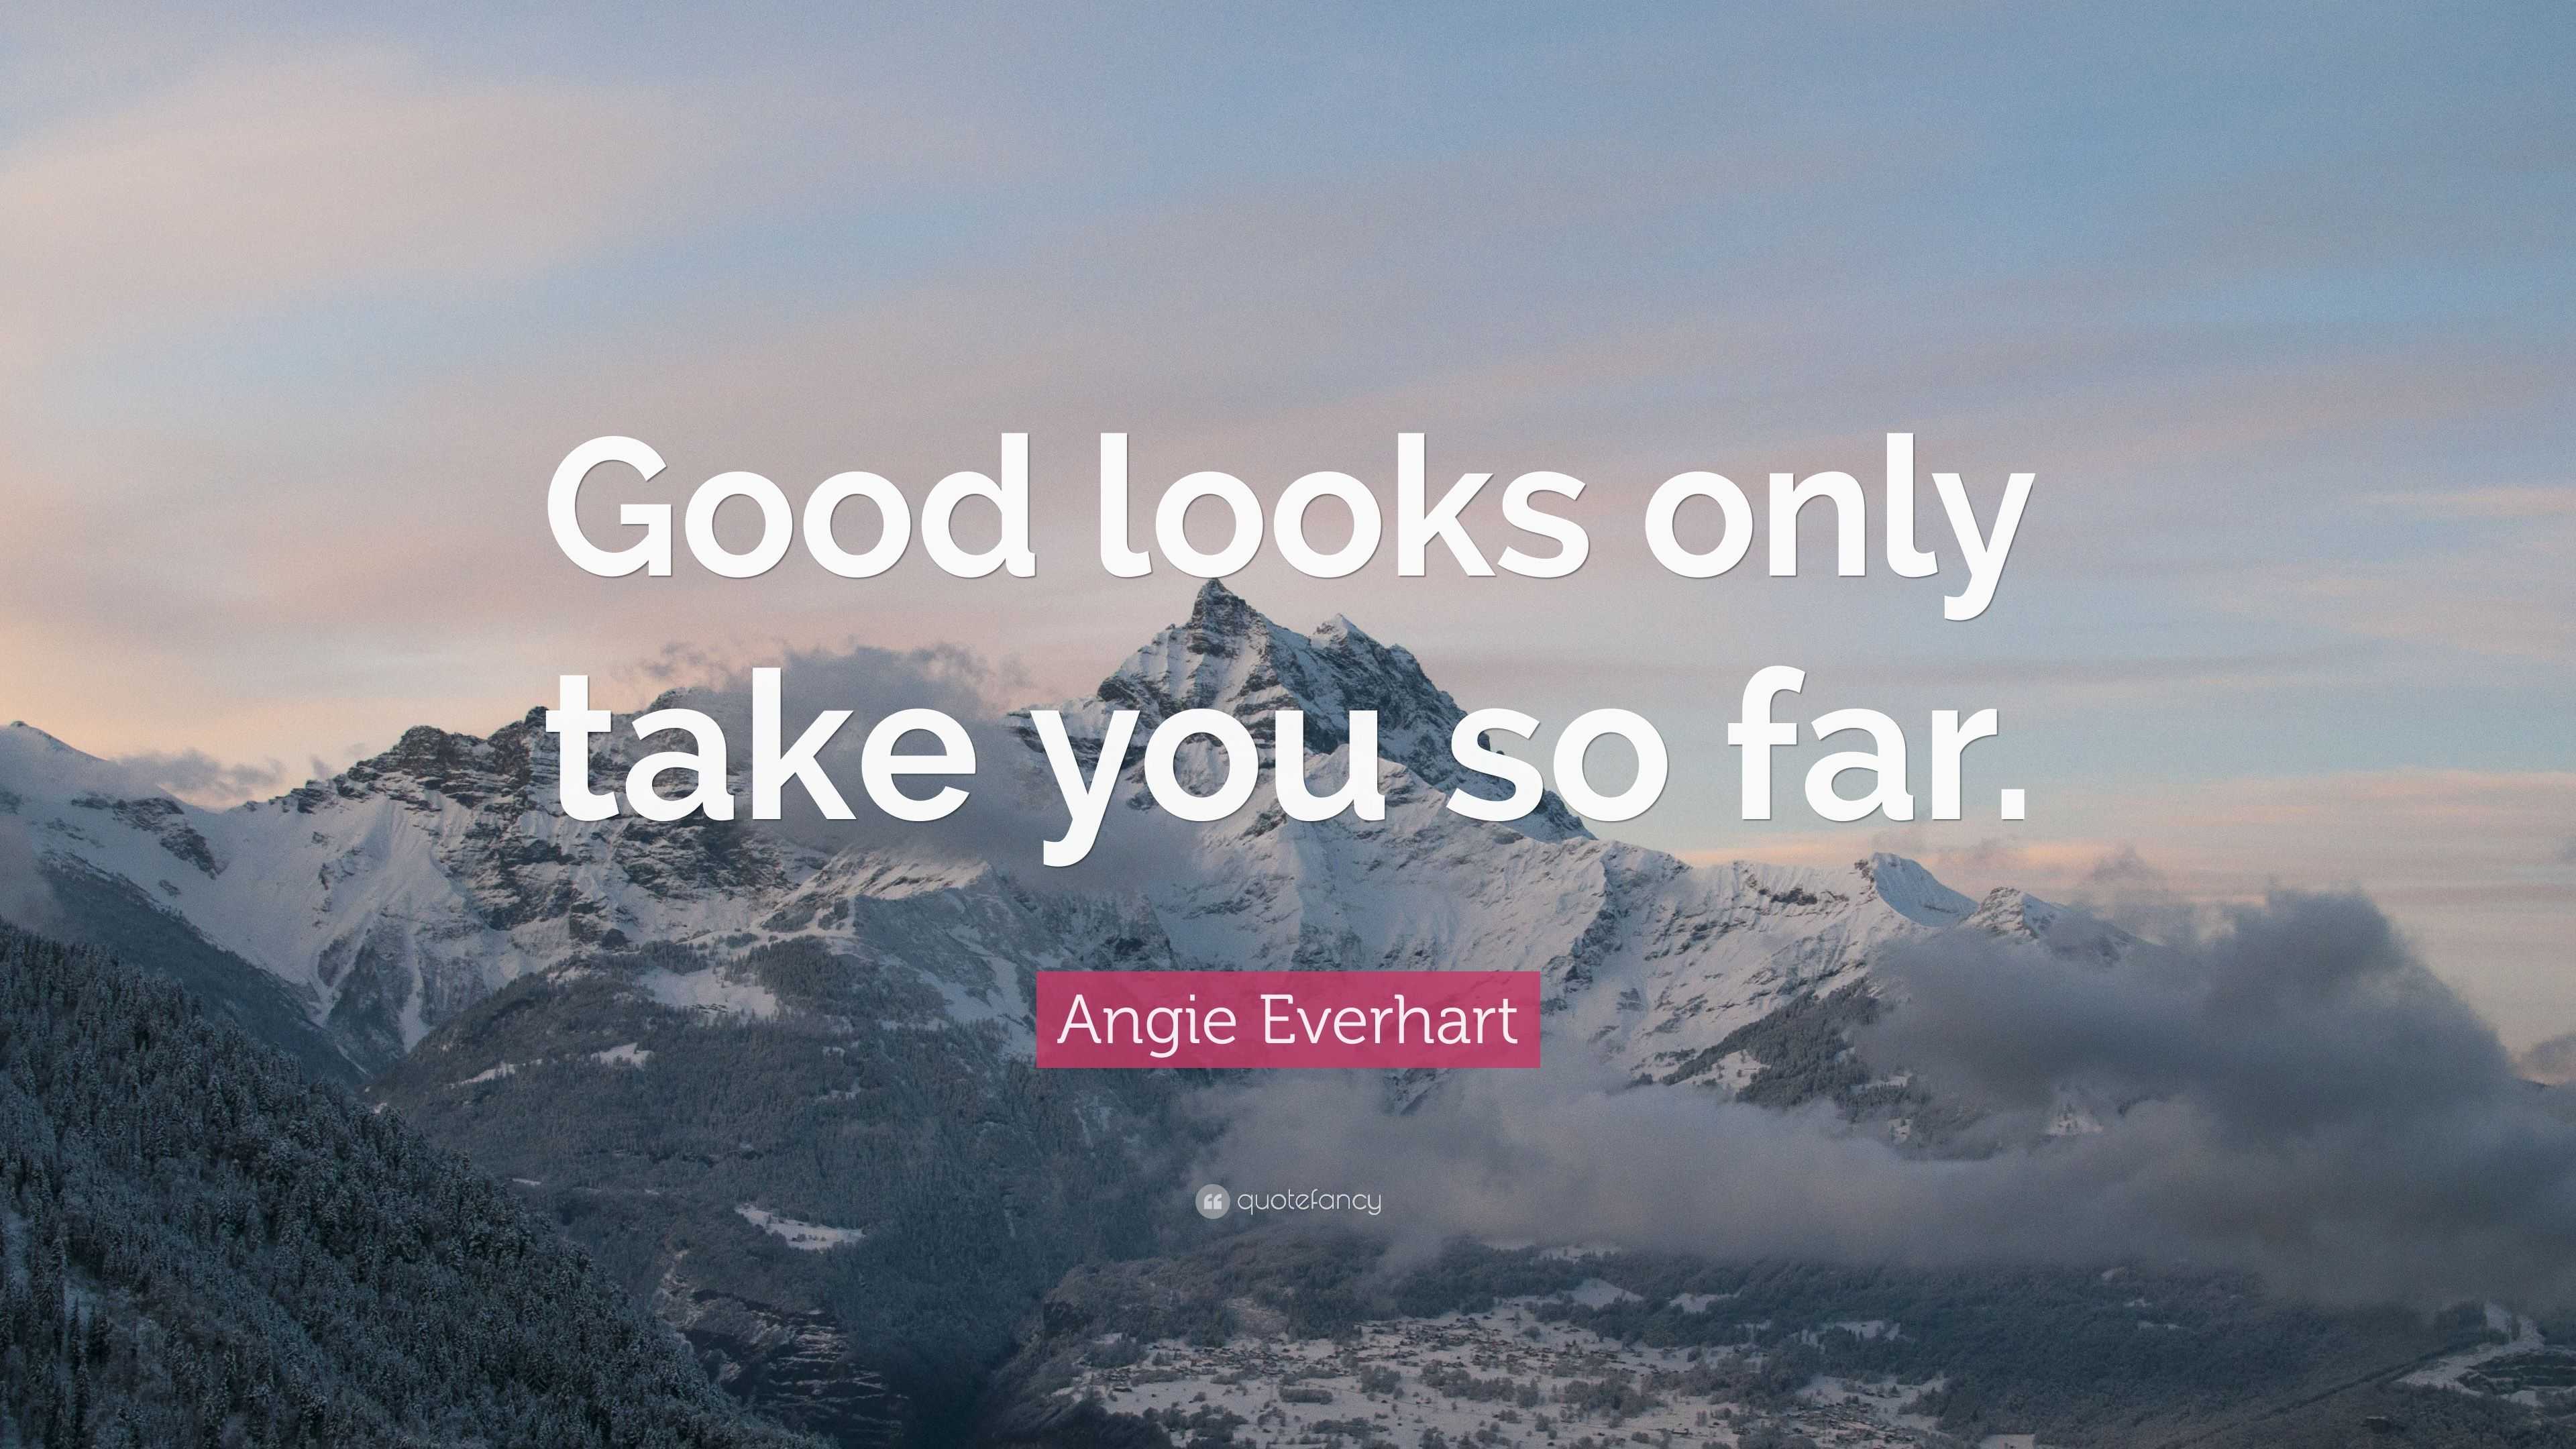 Angie Everhart Quote: “Good looks only take you so far.”